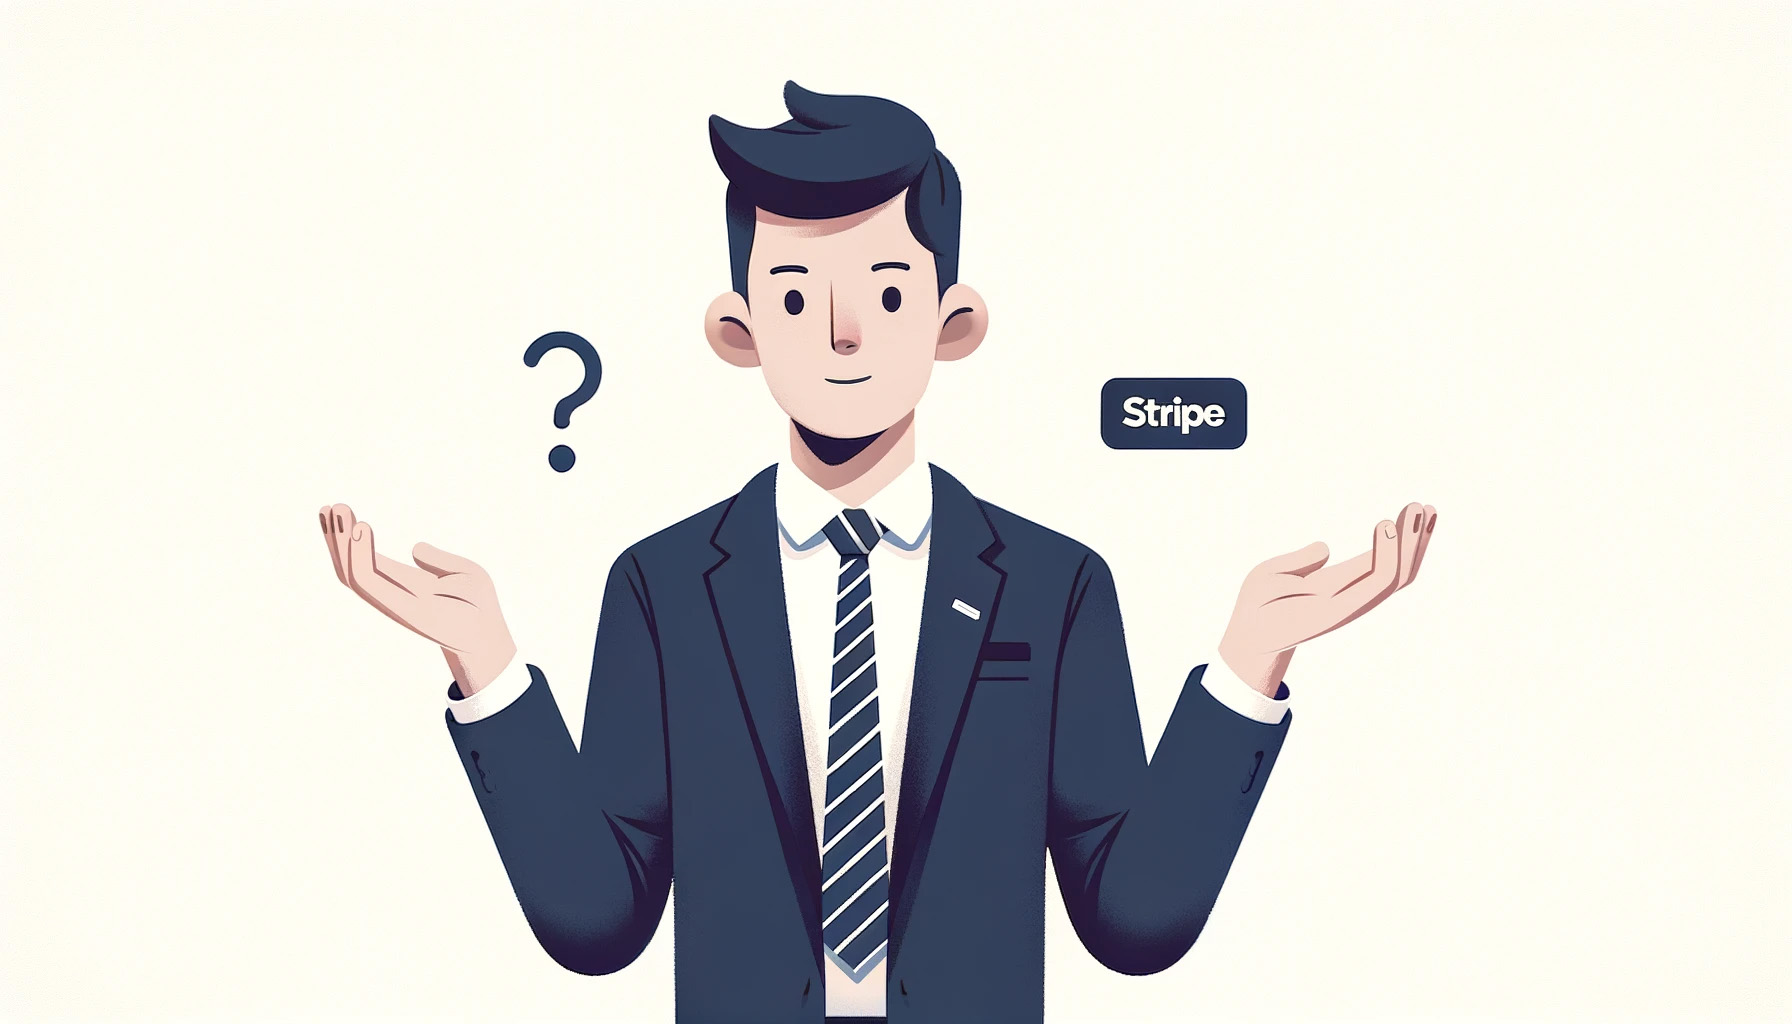 businessman standing with his hands out, question mark on one side, Stripe on the other.